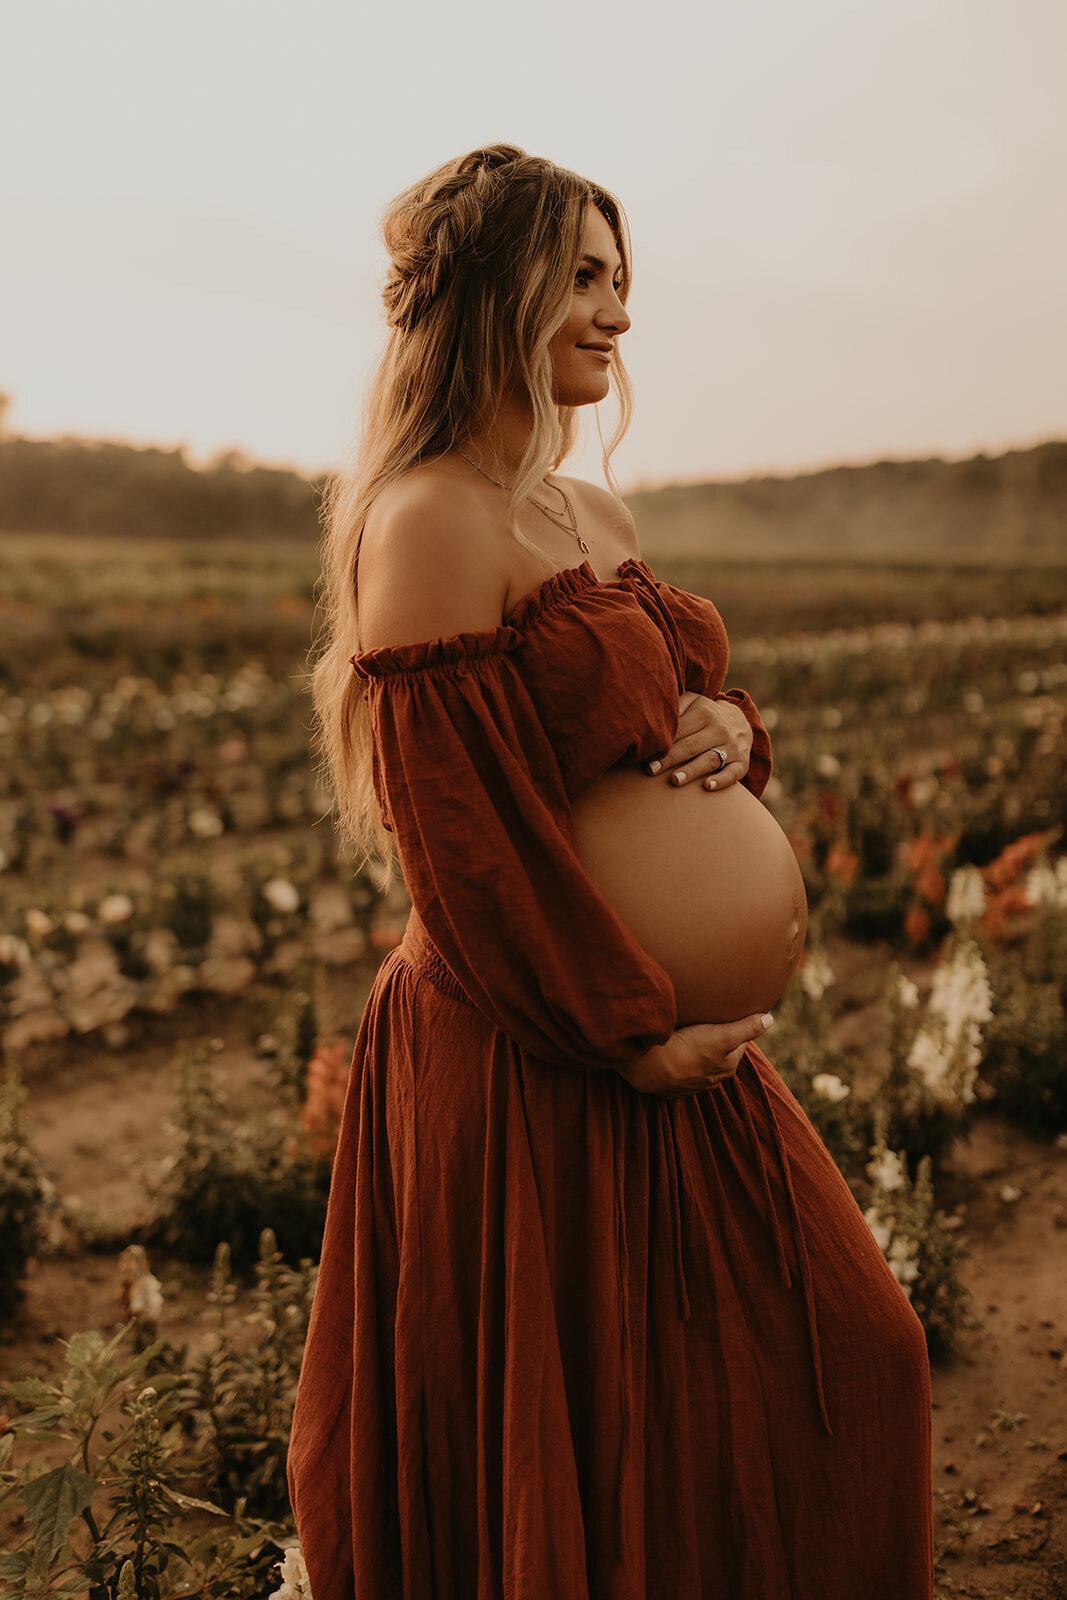 Sunset maternity photography in a flower field